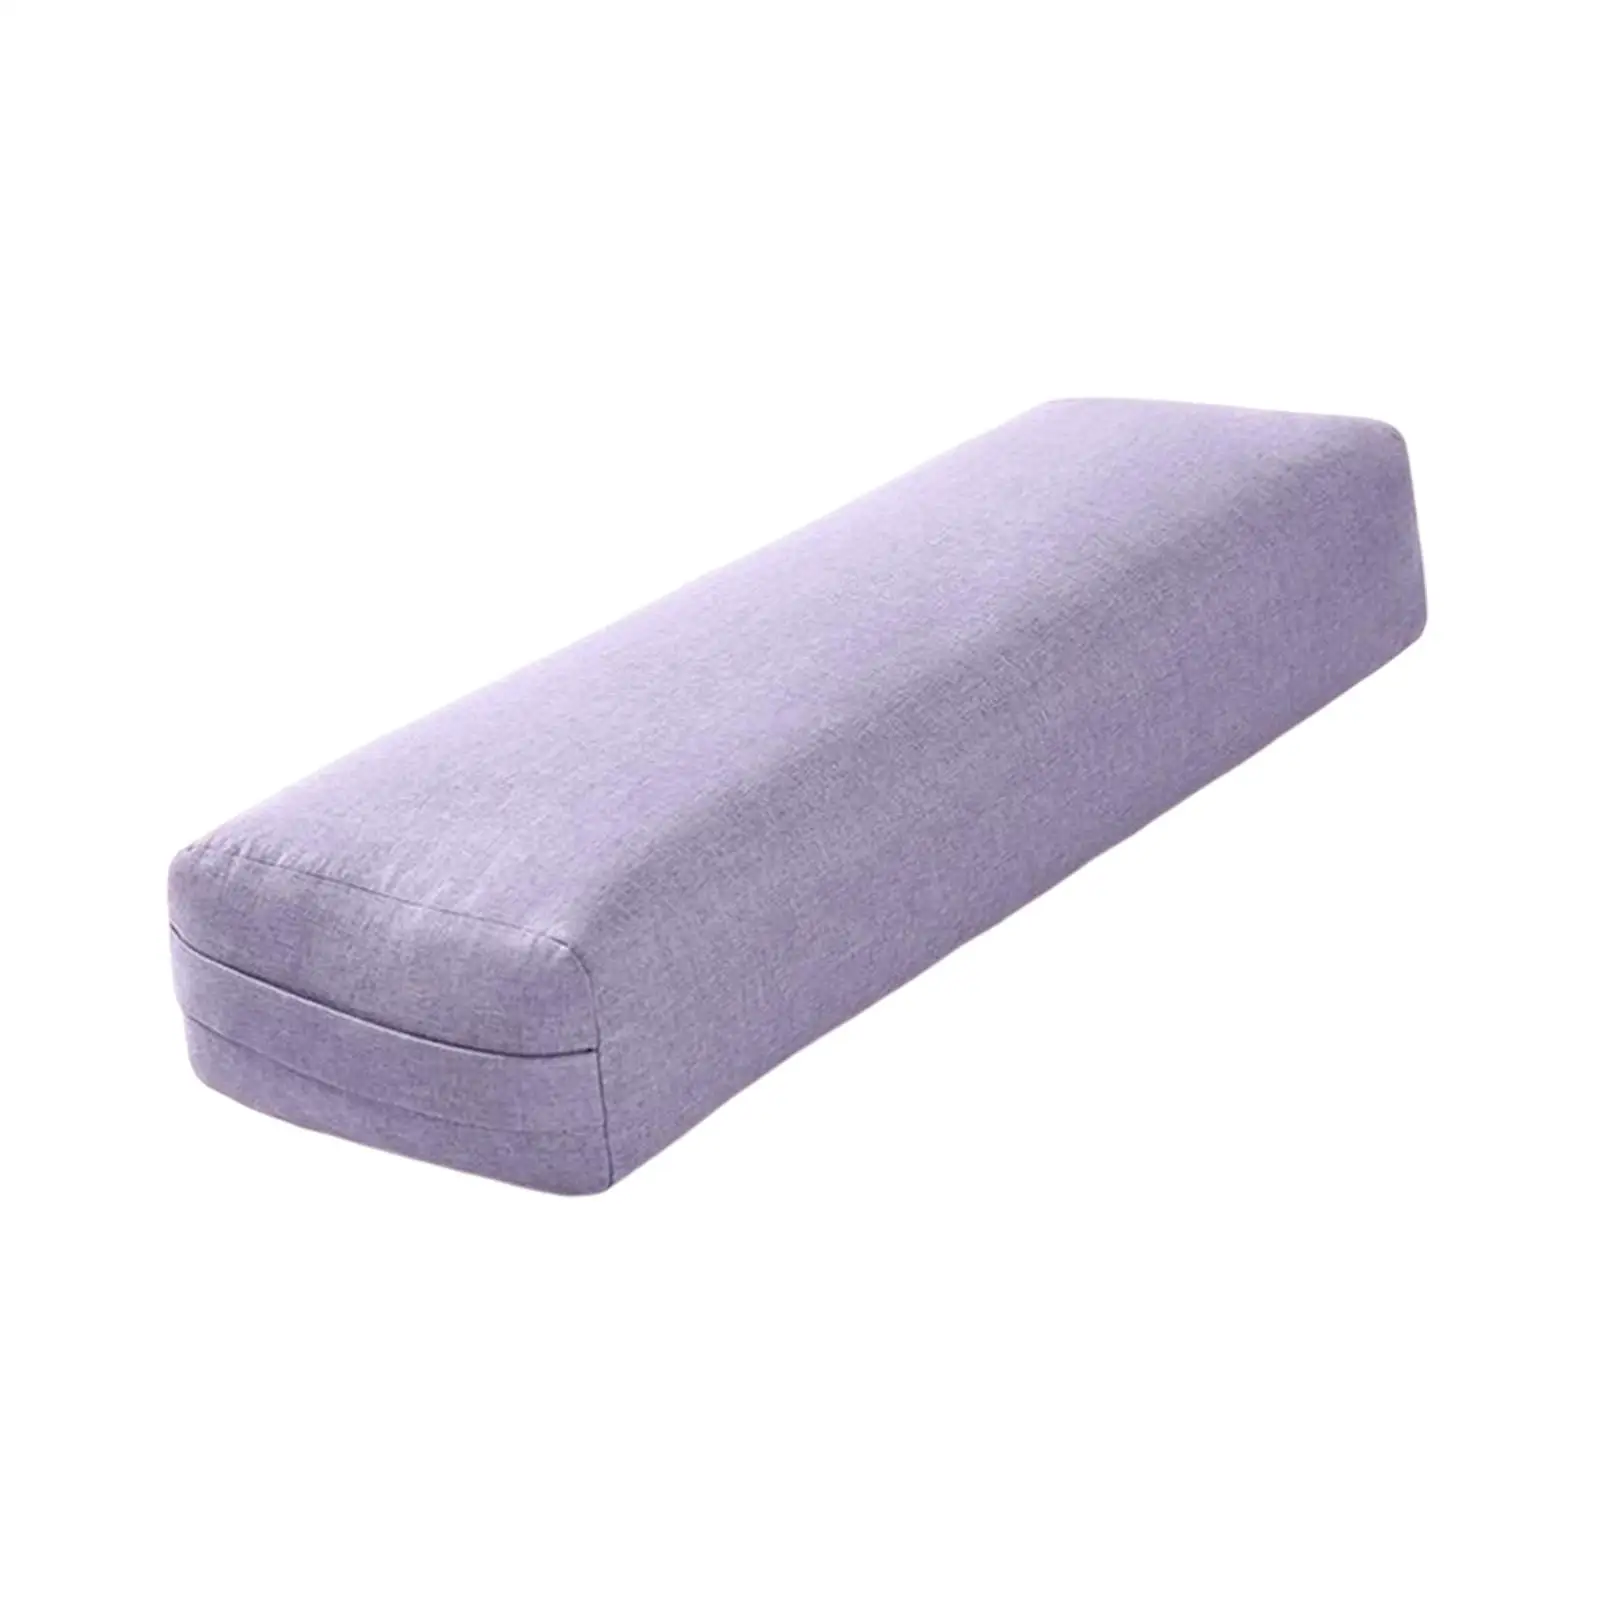 Yoga Bolster Yoga Equipment Removable Washable Cover with Carry Handle Pillow Rectangular High Elastic Cushion for Legs Support